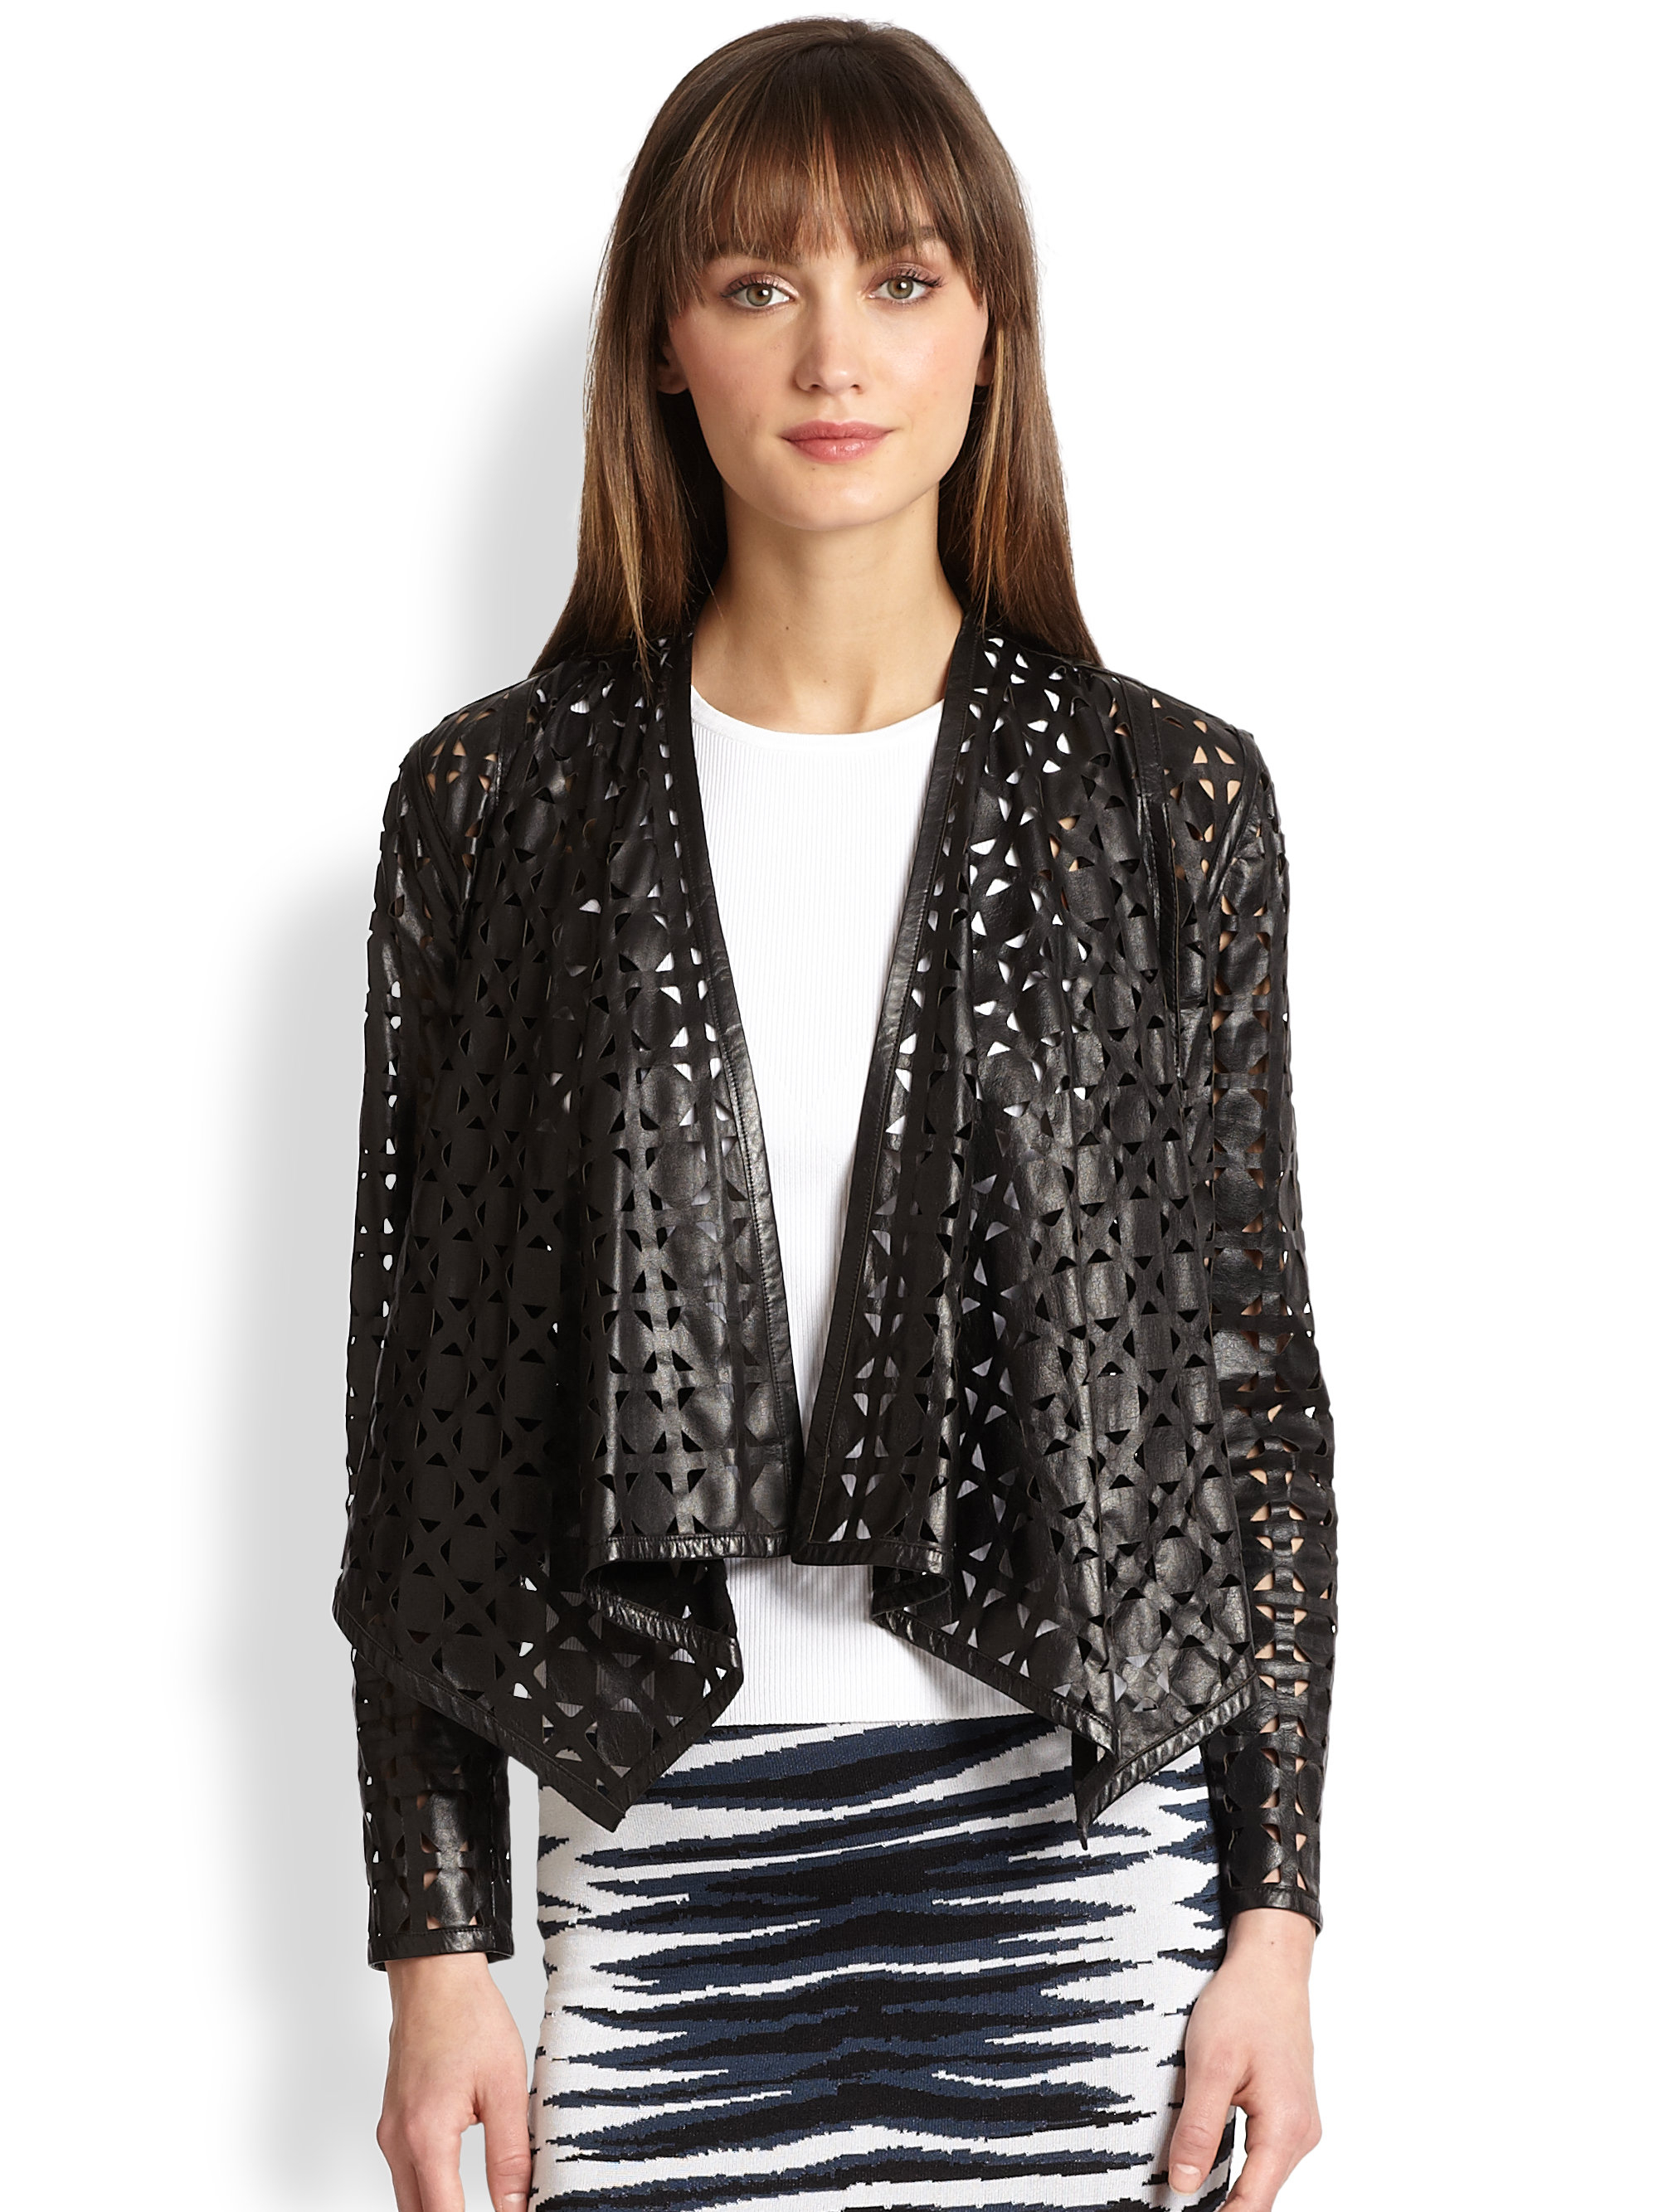 Lyst - Milly Draped Laser-Cut Leather Jacket in Black